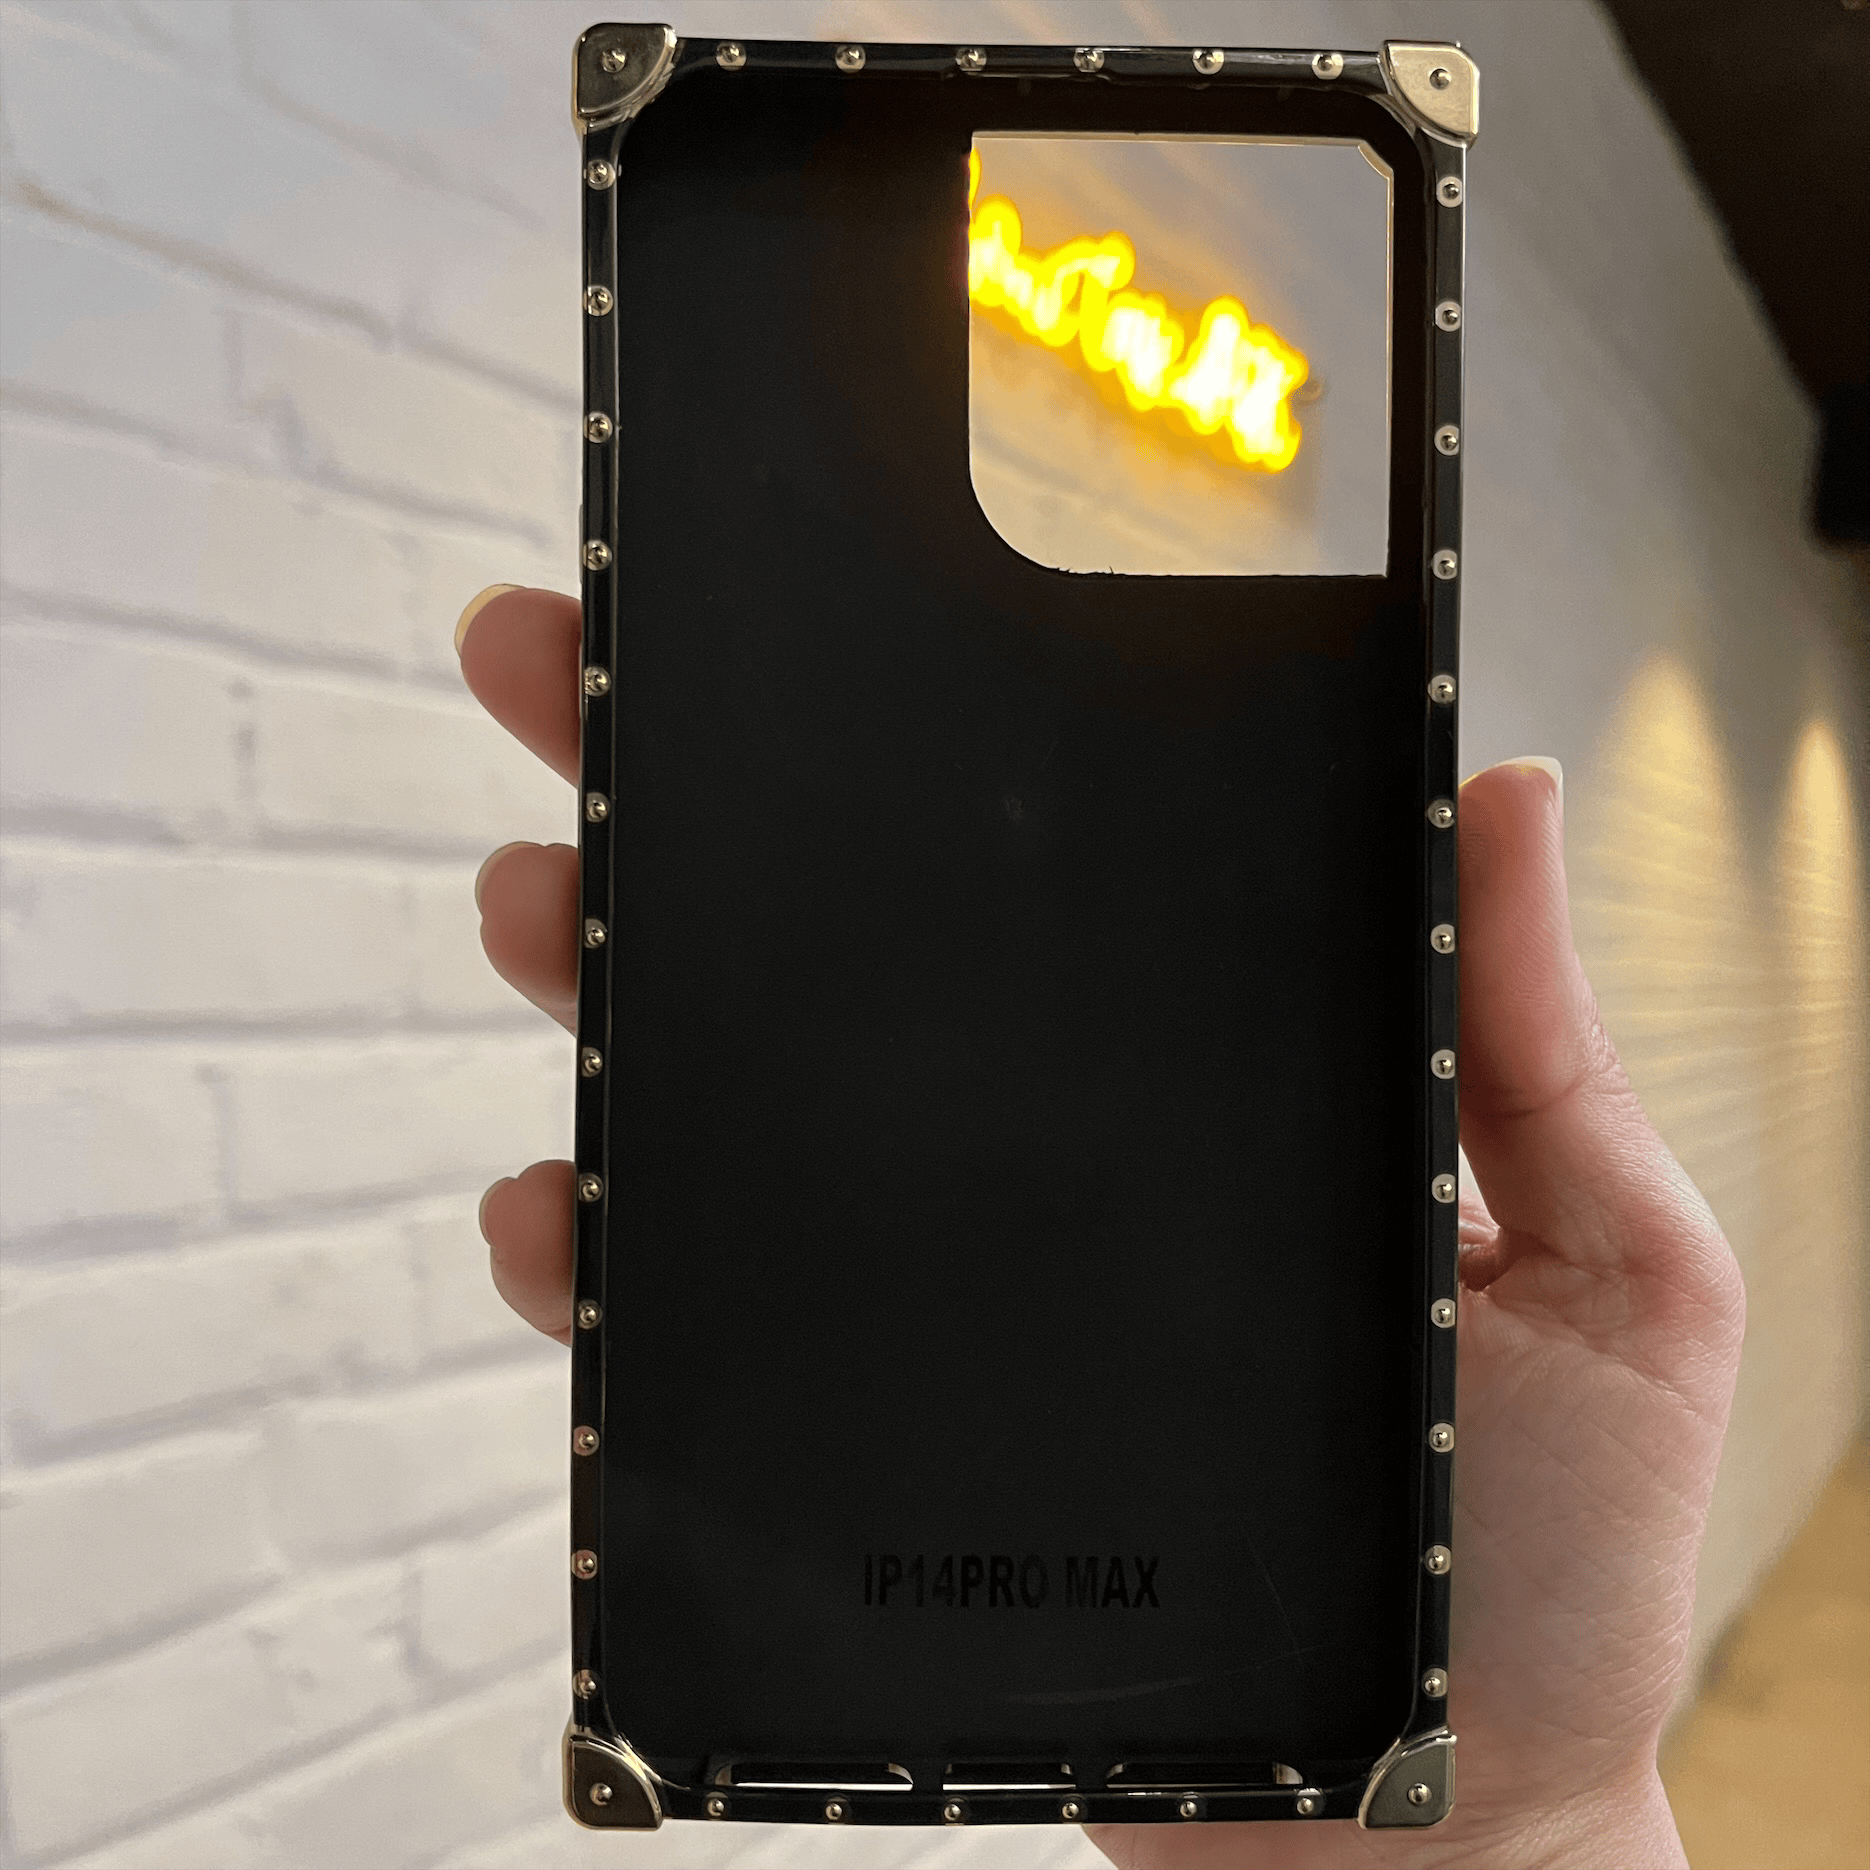 iPhone 11 Pro Luxury Space Bear Case With Hidden Folding Stand Case